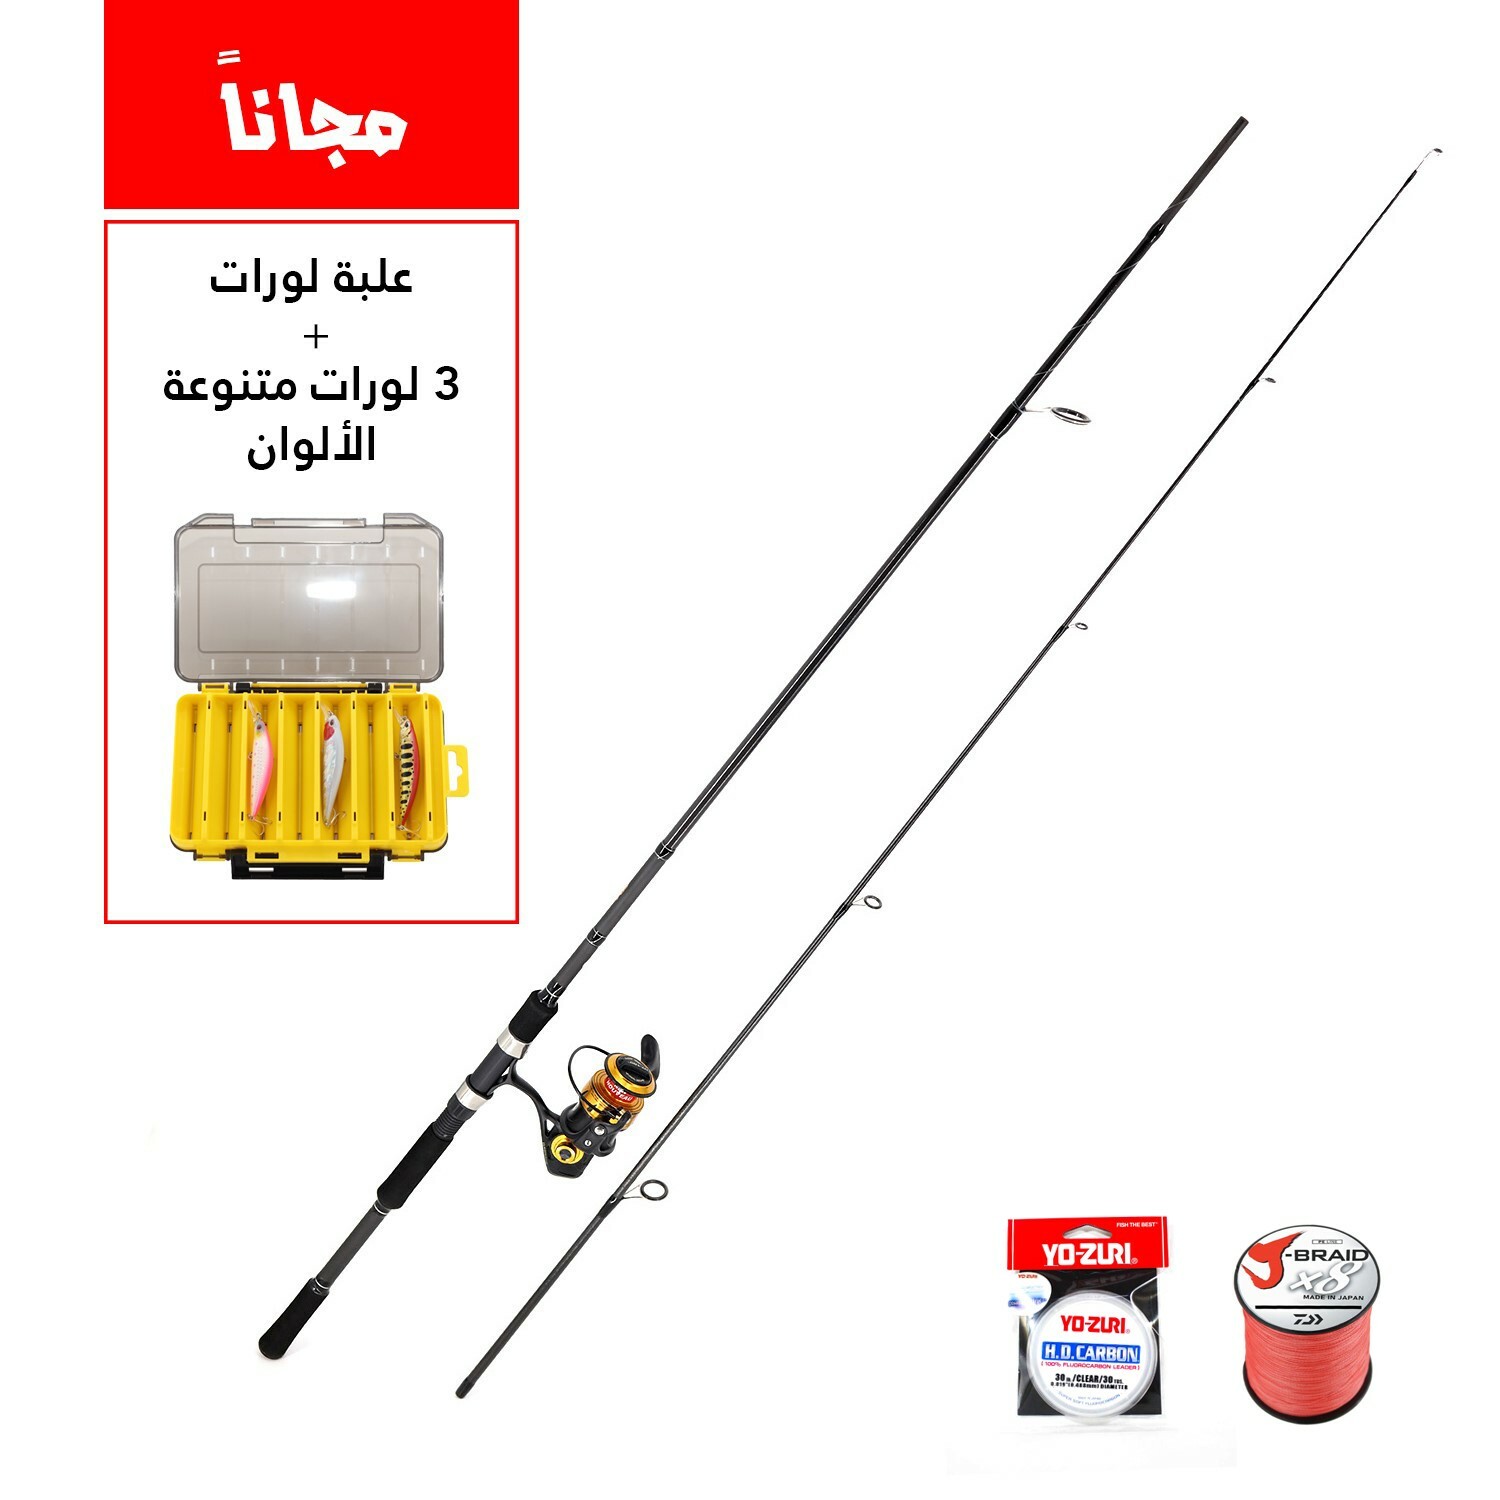 Casting (Shimano 2.7m and Penn VI 3500 reel including Daiwa Braid 22lb and fluorocarbon lines) Combo